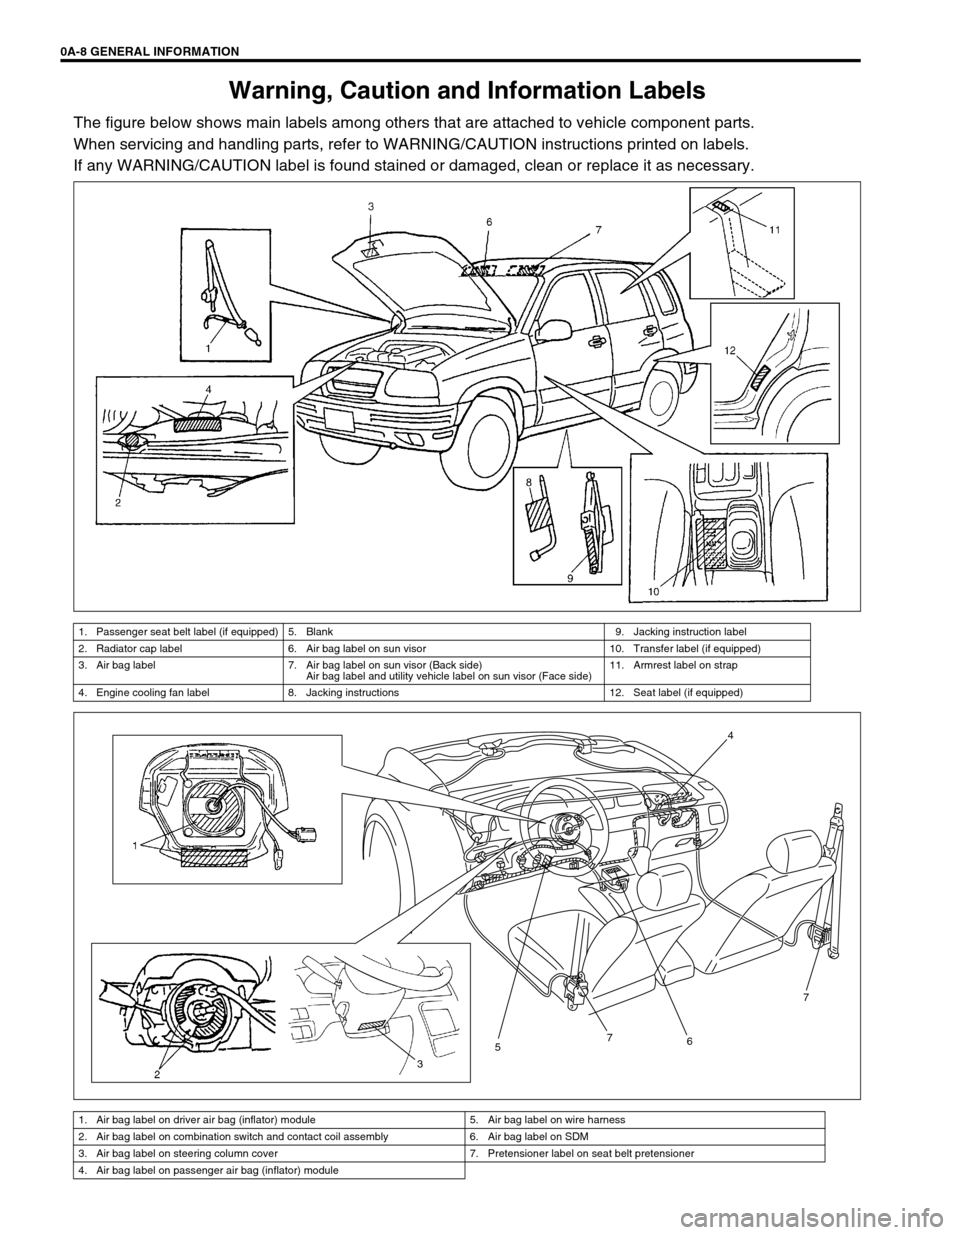 SUZUKI GRAND VITARA 2001 2.G Owners Manual 0A-8 GENERAL INFORMATION
Warning, Caution and Information Labels
The figure below shows main labels among others that are attached to vehicle component parts.
When servicing and handling parts, refer 